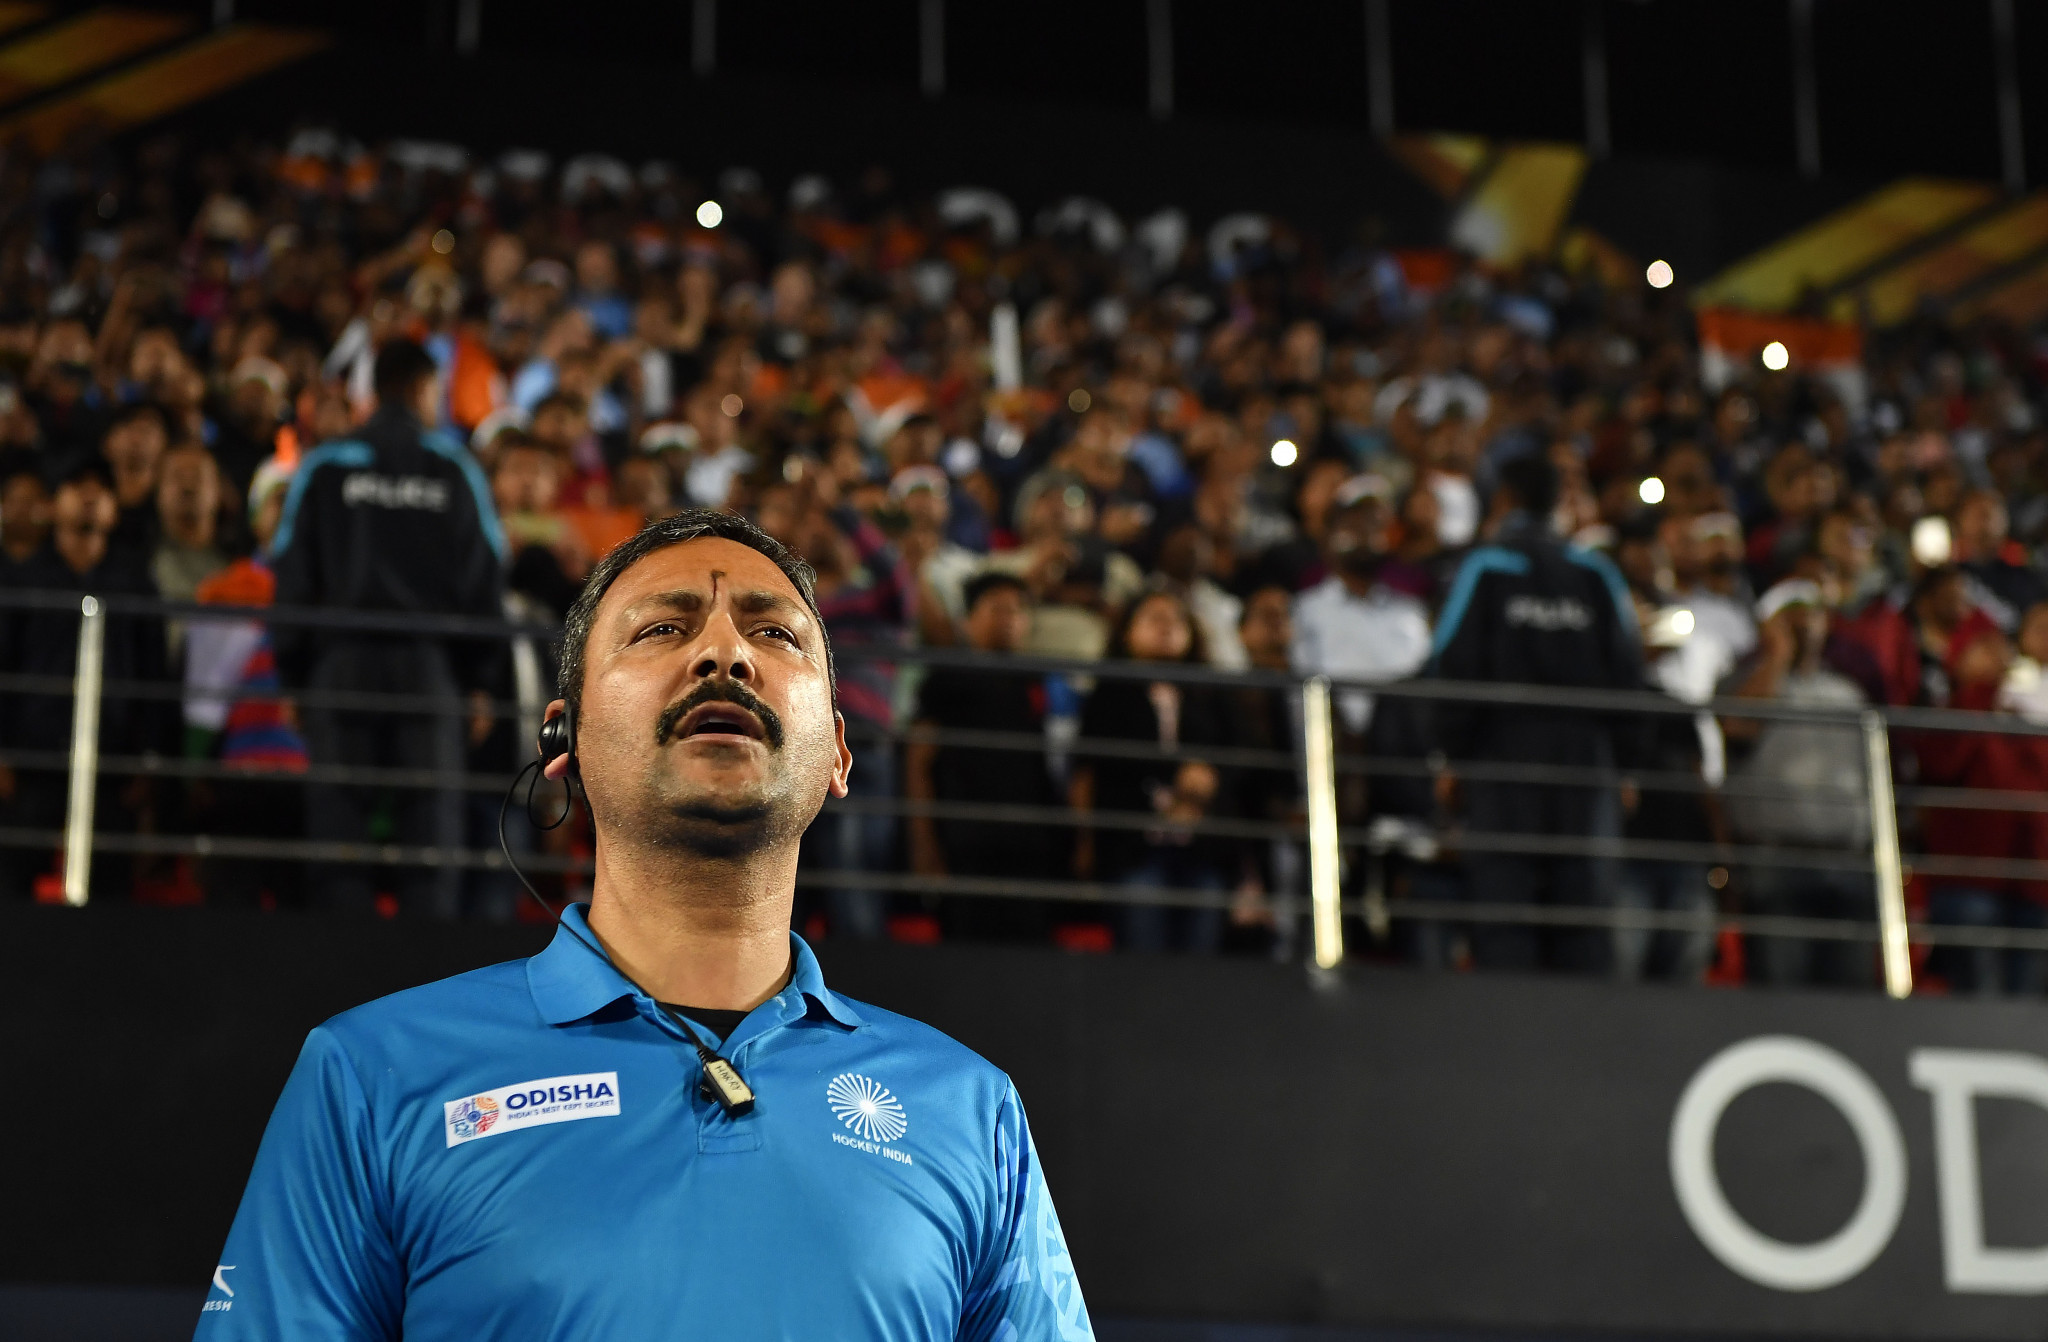 Sacked head coach claims Hockey India interfered with team selection for World Cup